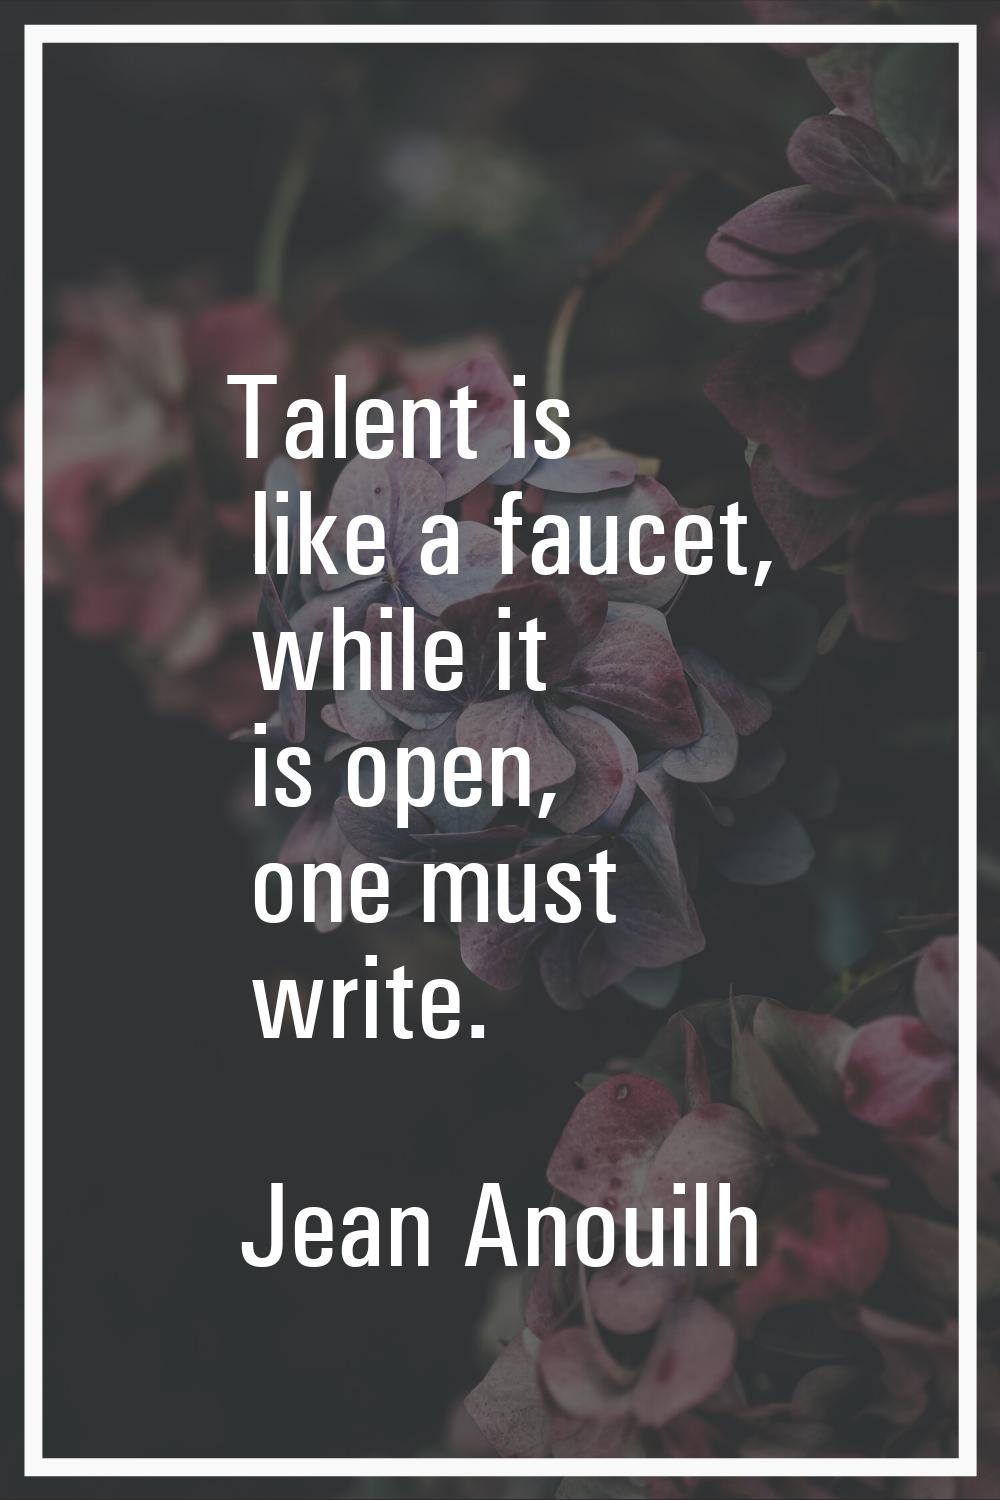 Talent is like a faucet, while it is open, one must write.